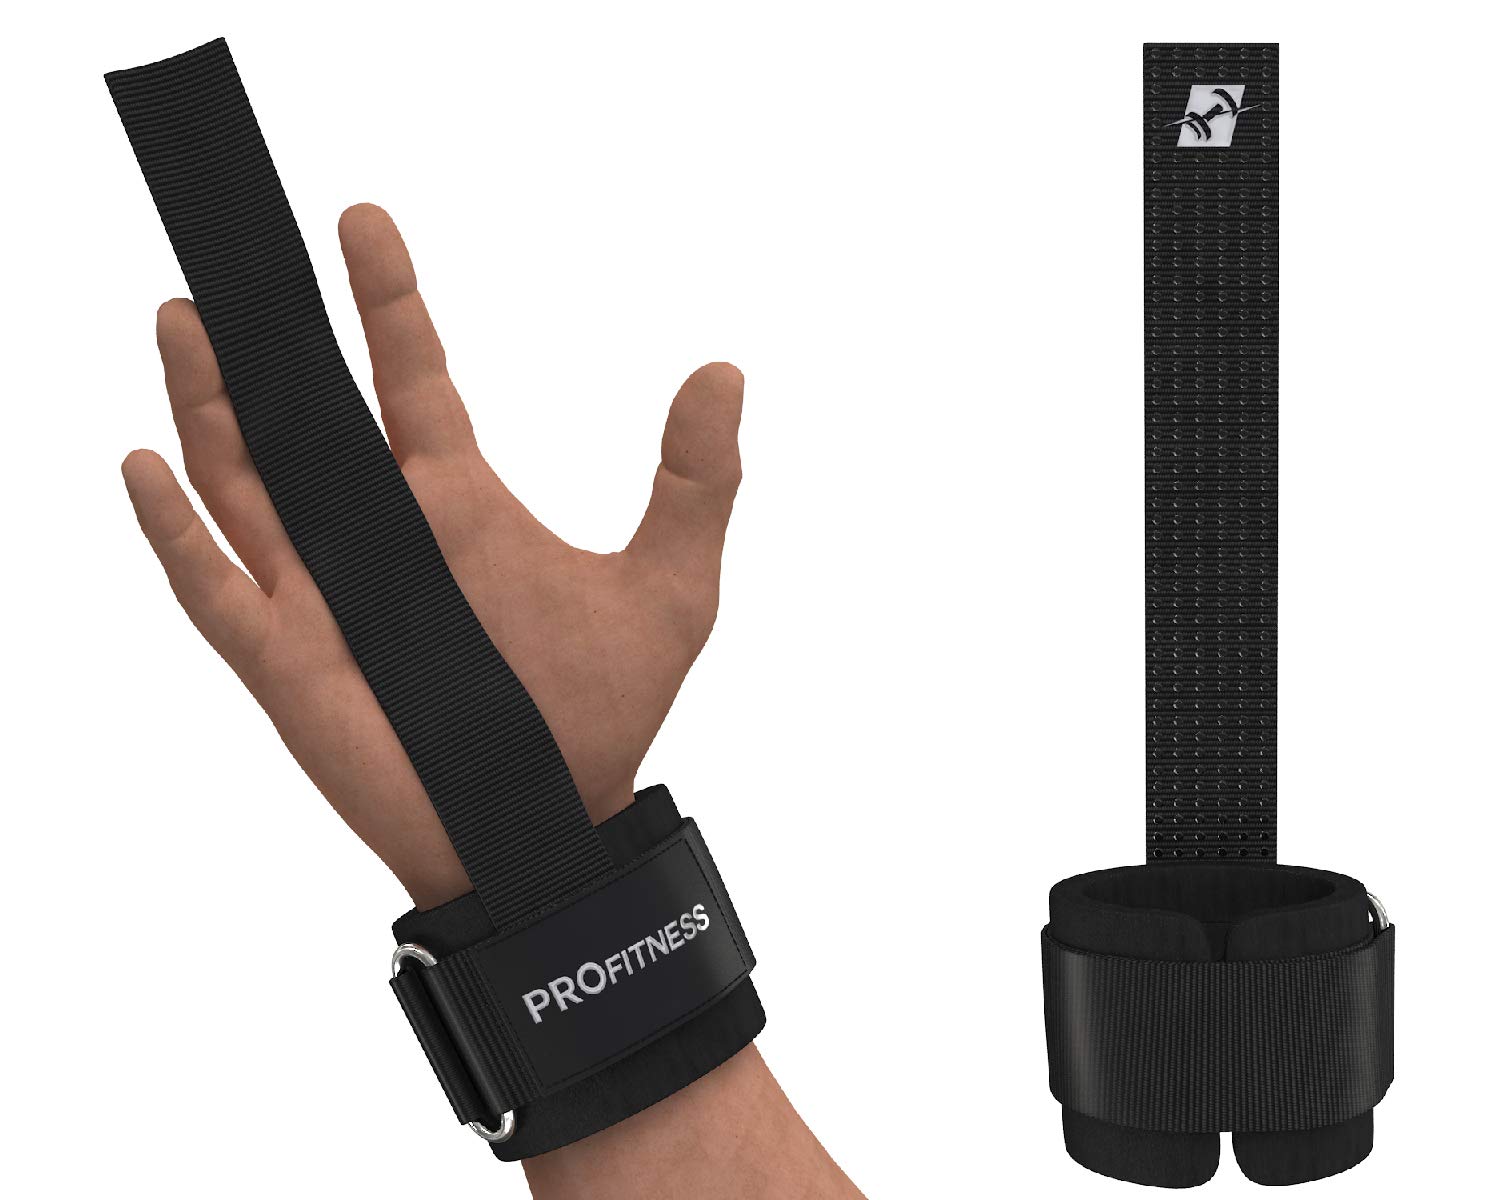 Weightlifting Straps and Wrist Wraps: high quality weightlifting